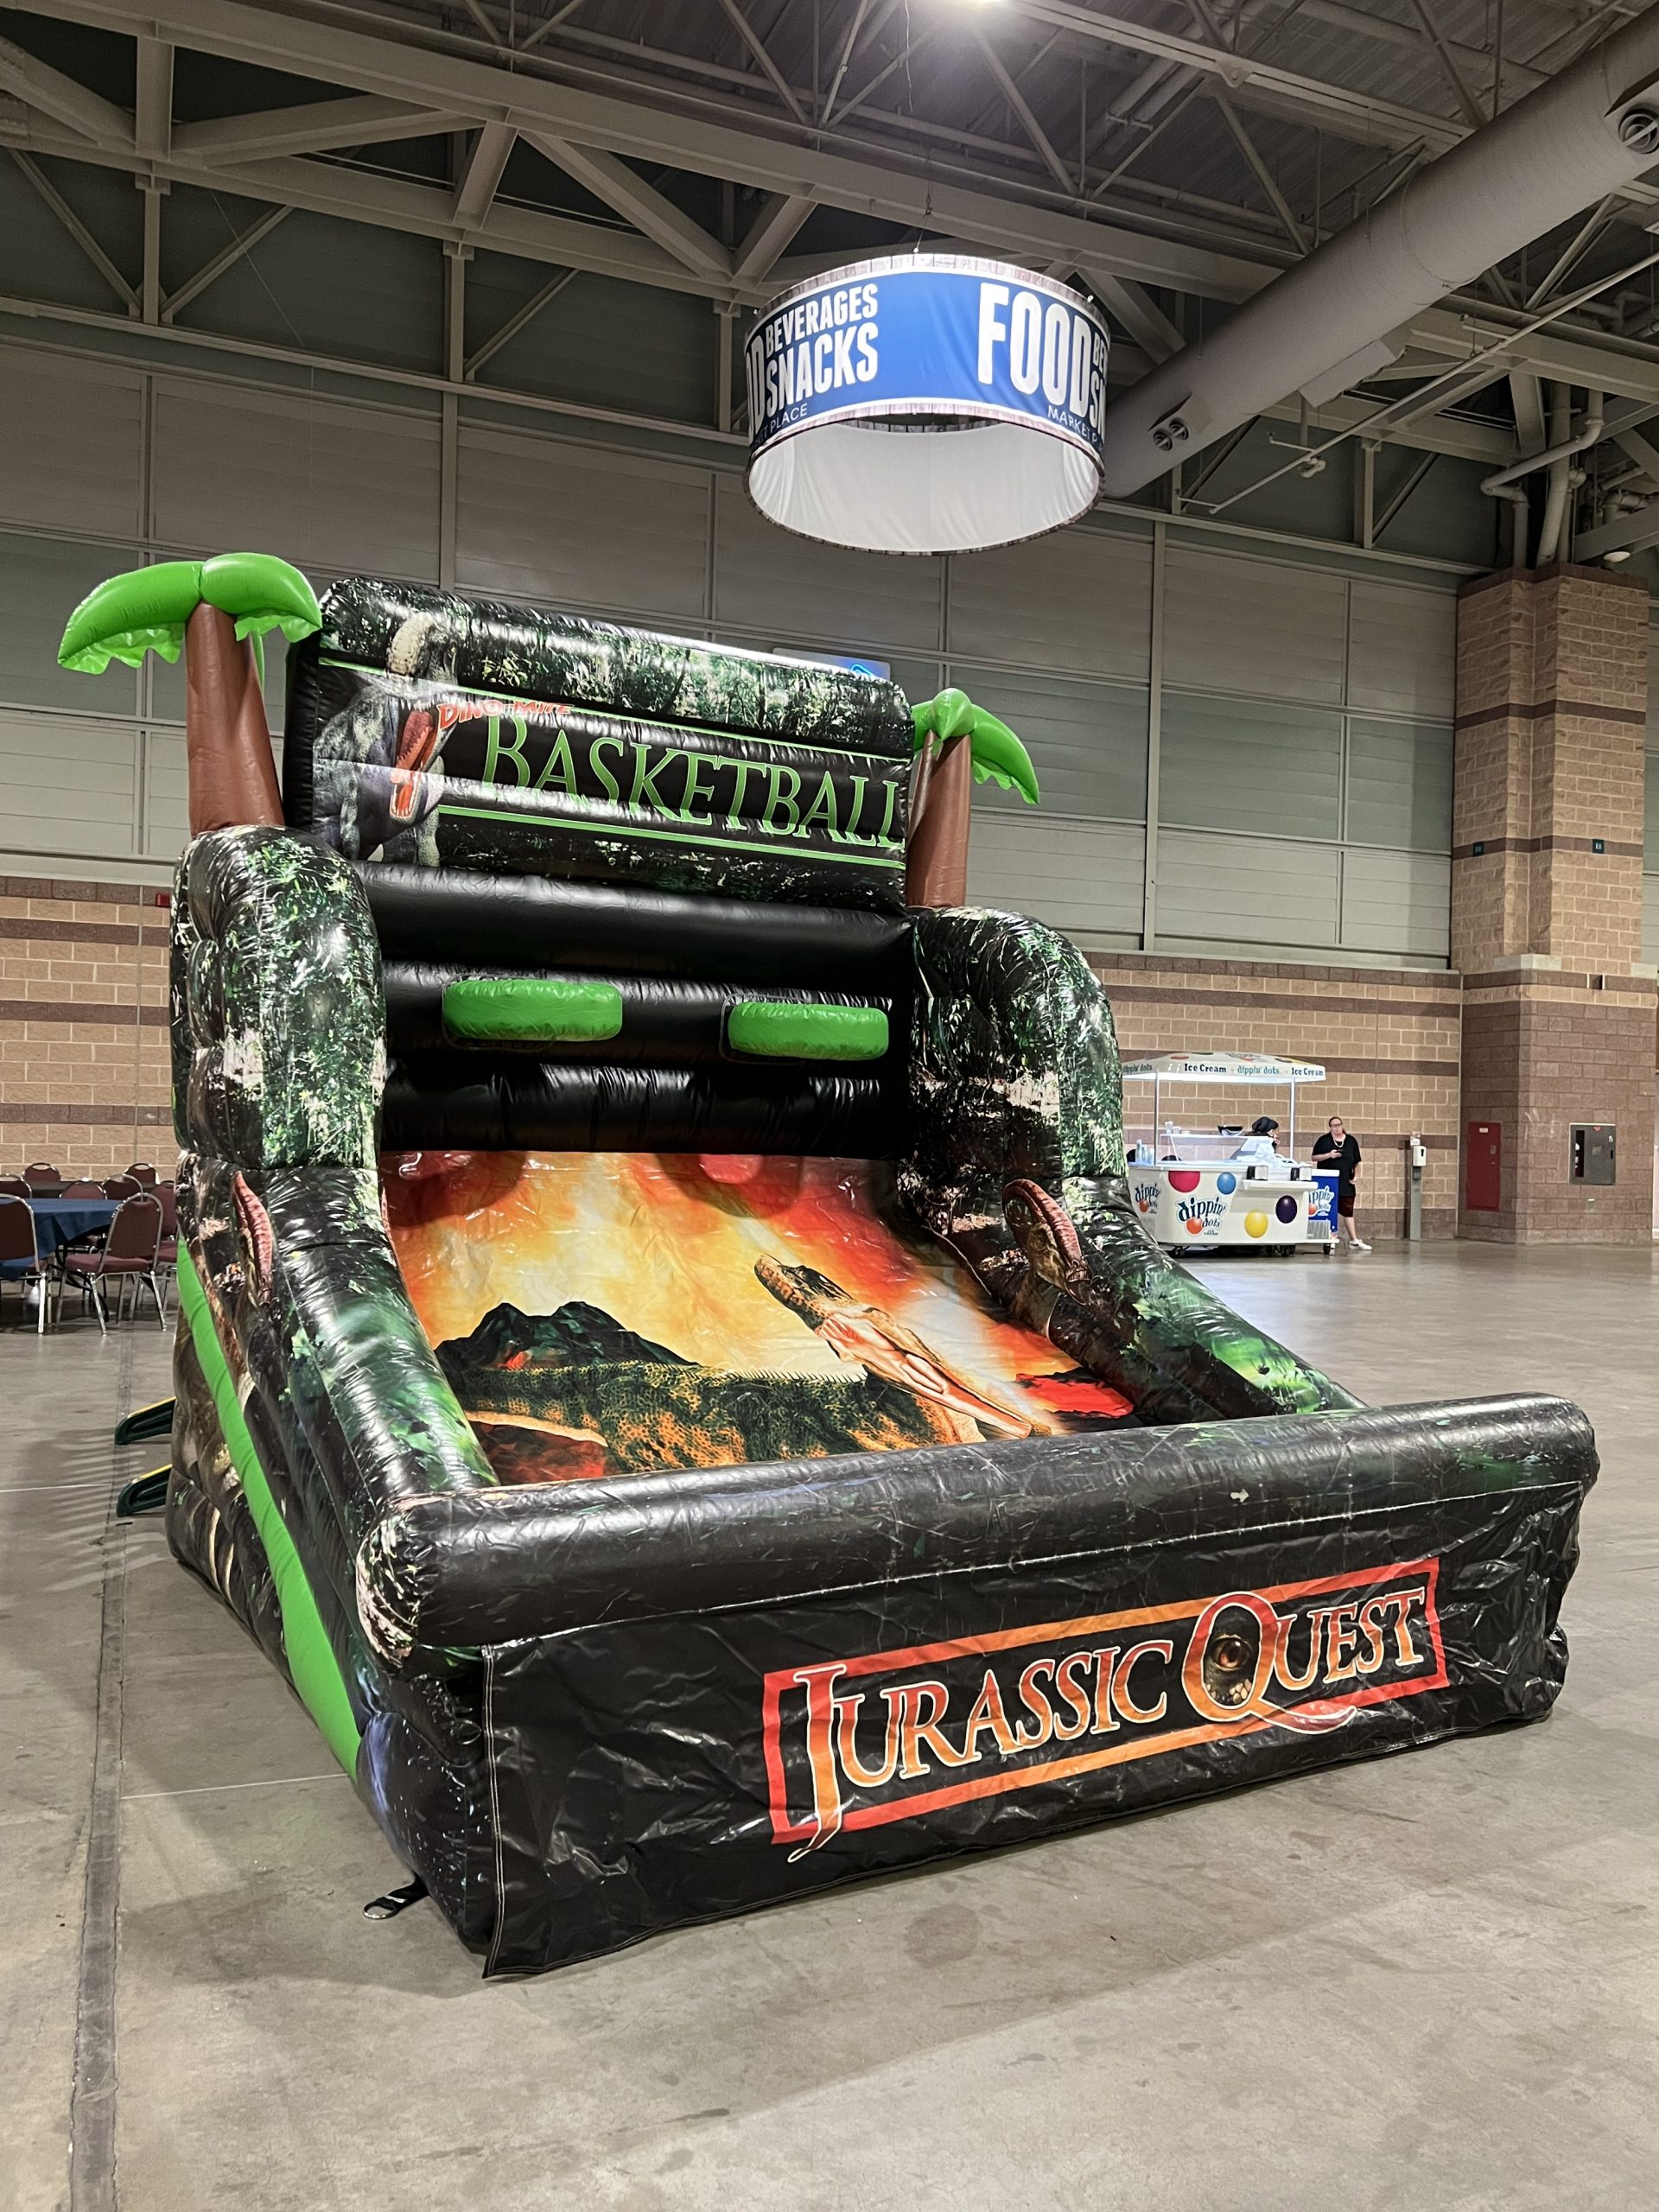 GAMES - Basketball TALL at Jurassic Quest in Atlantic City at the Atlantic City Convention Center